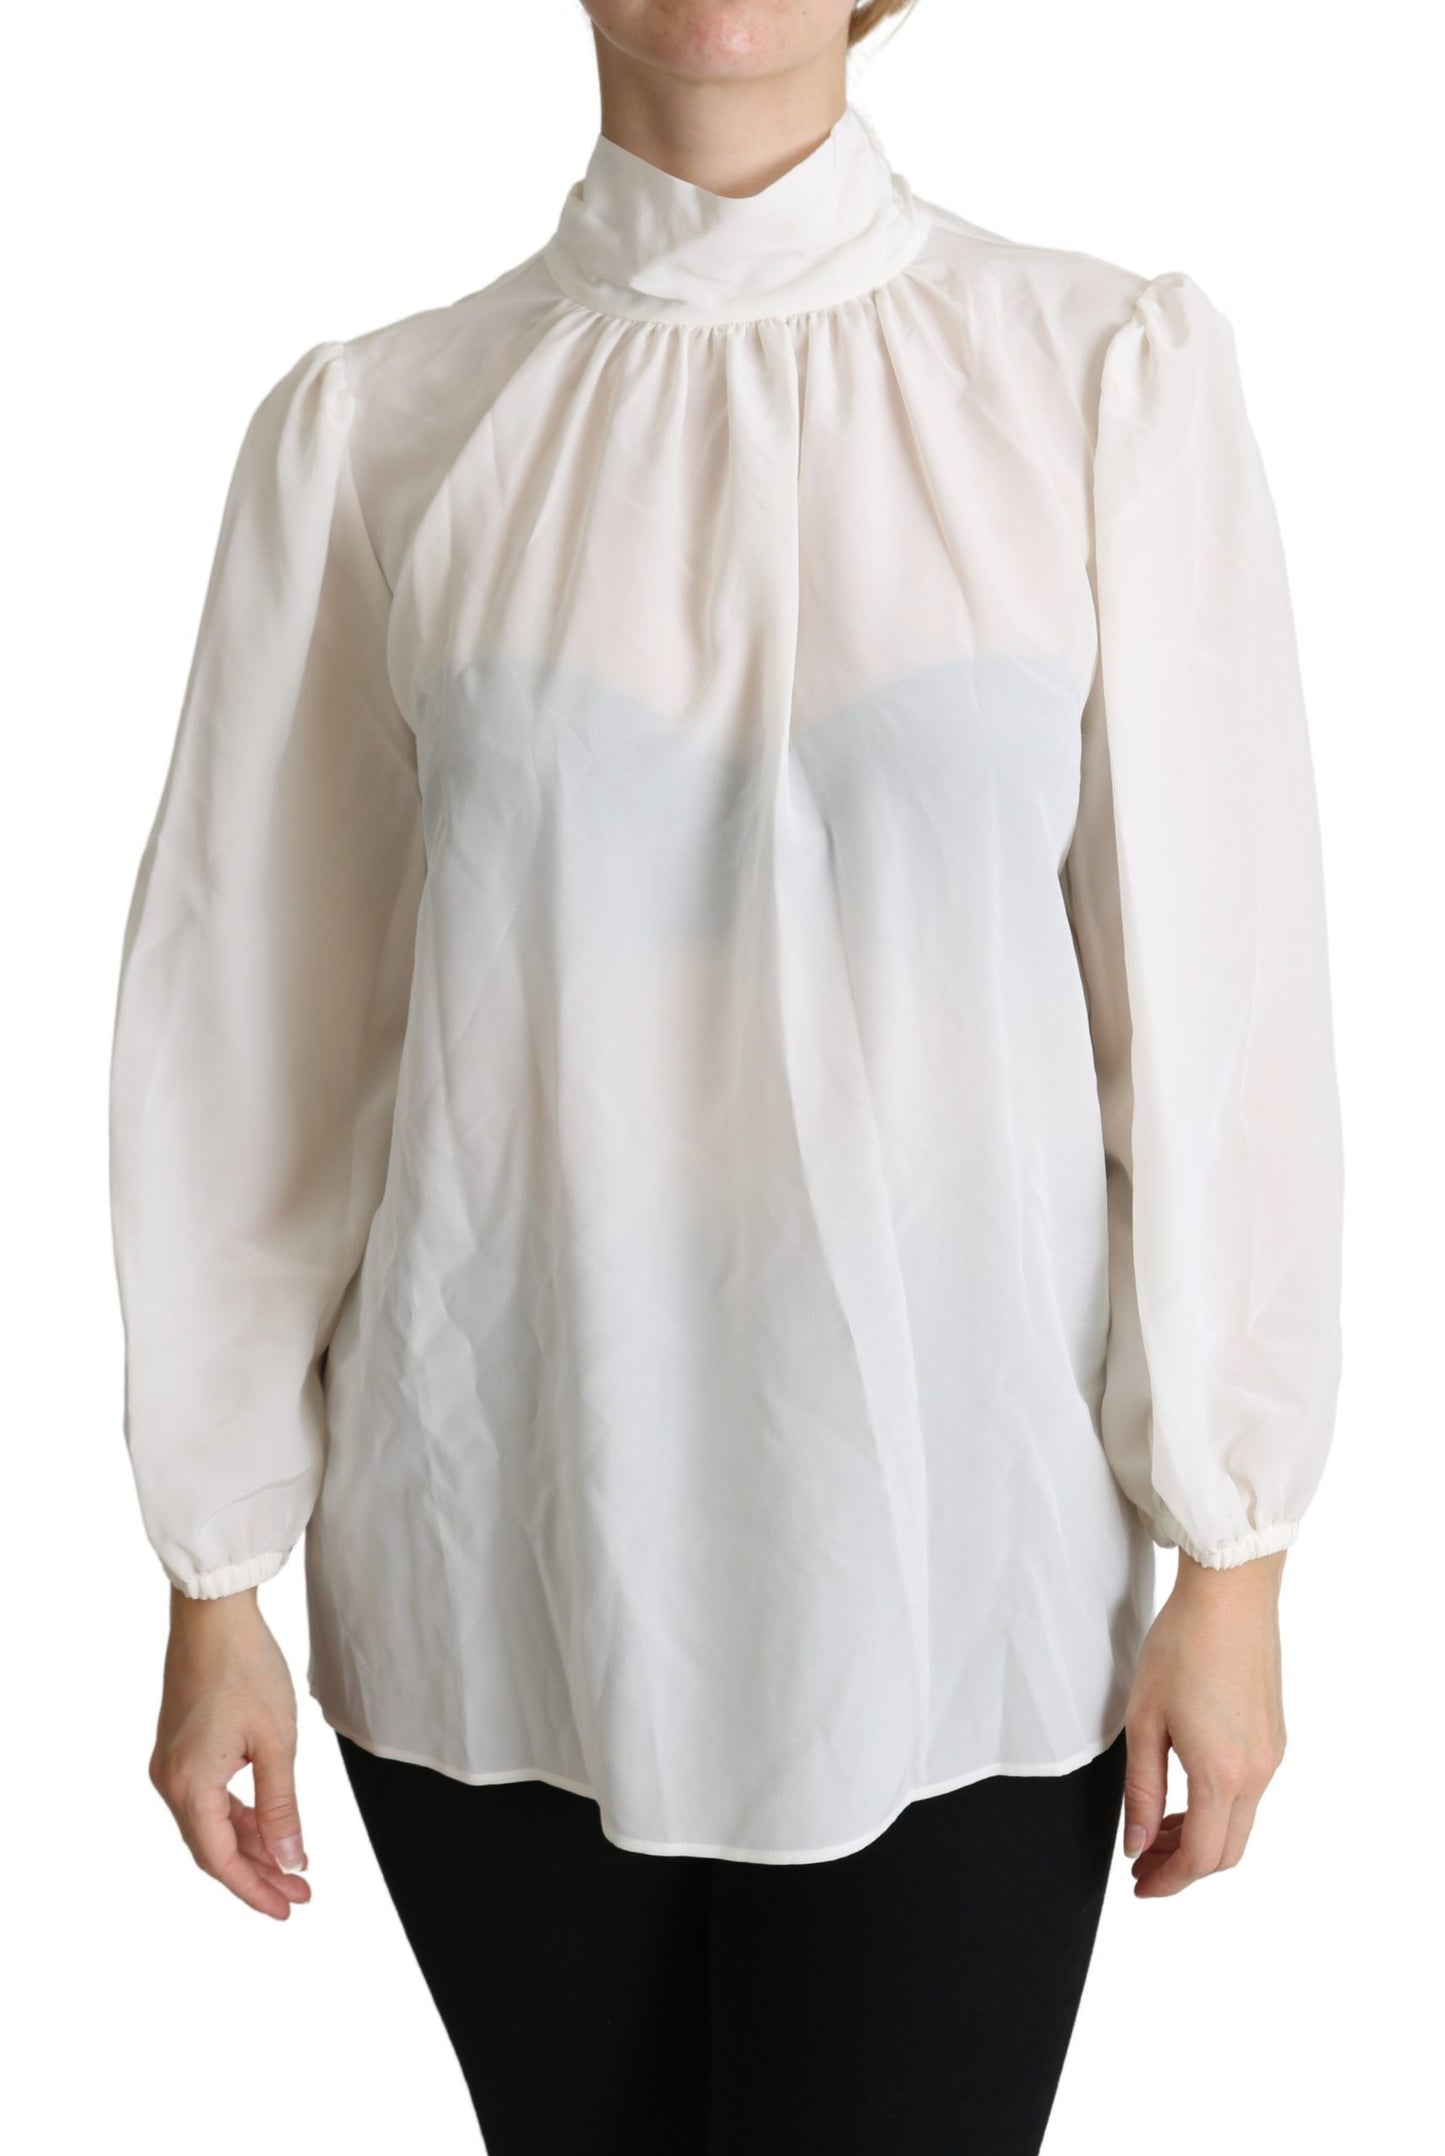 Dolce & Gabbana White Silk Pussy Bow Long Sleeved Top Blouse